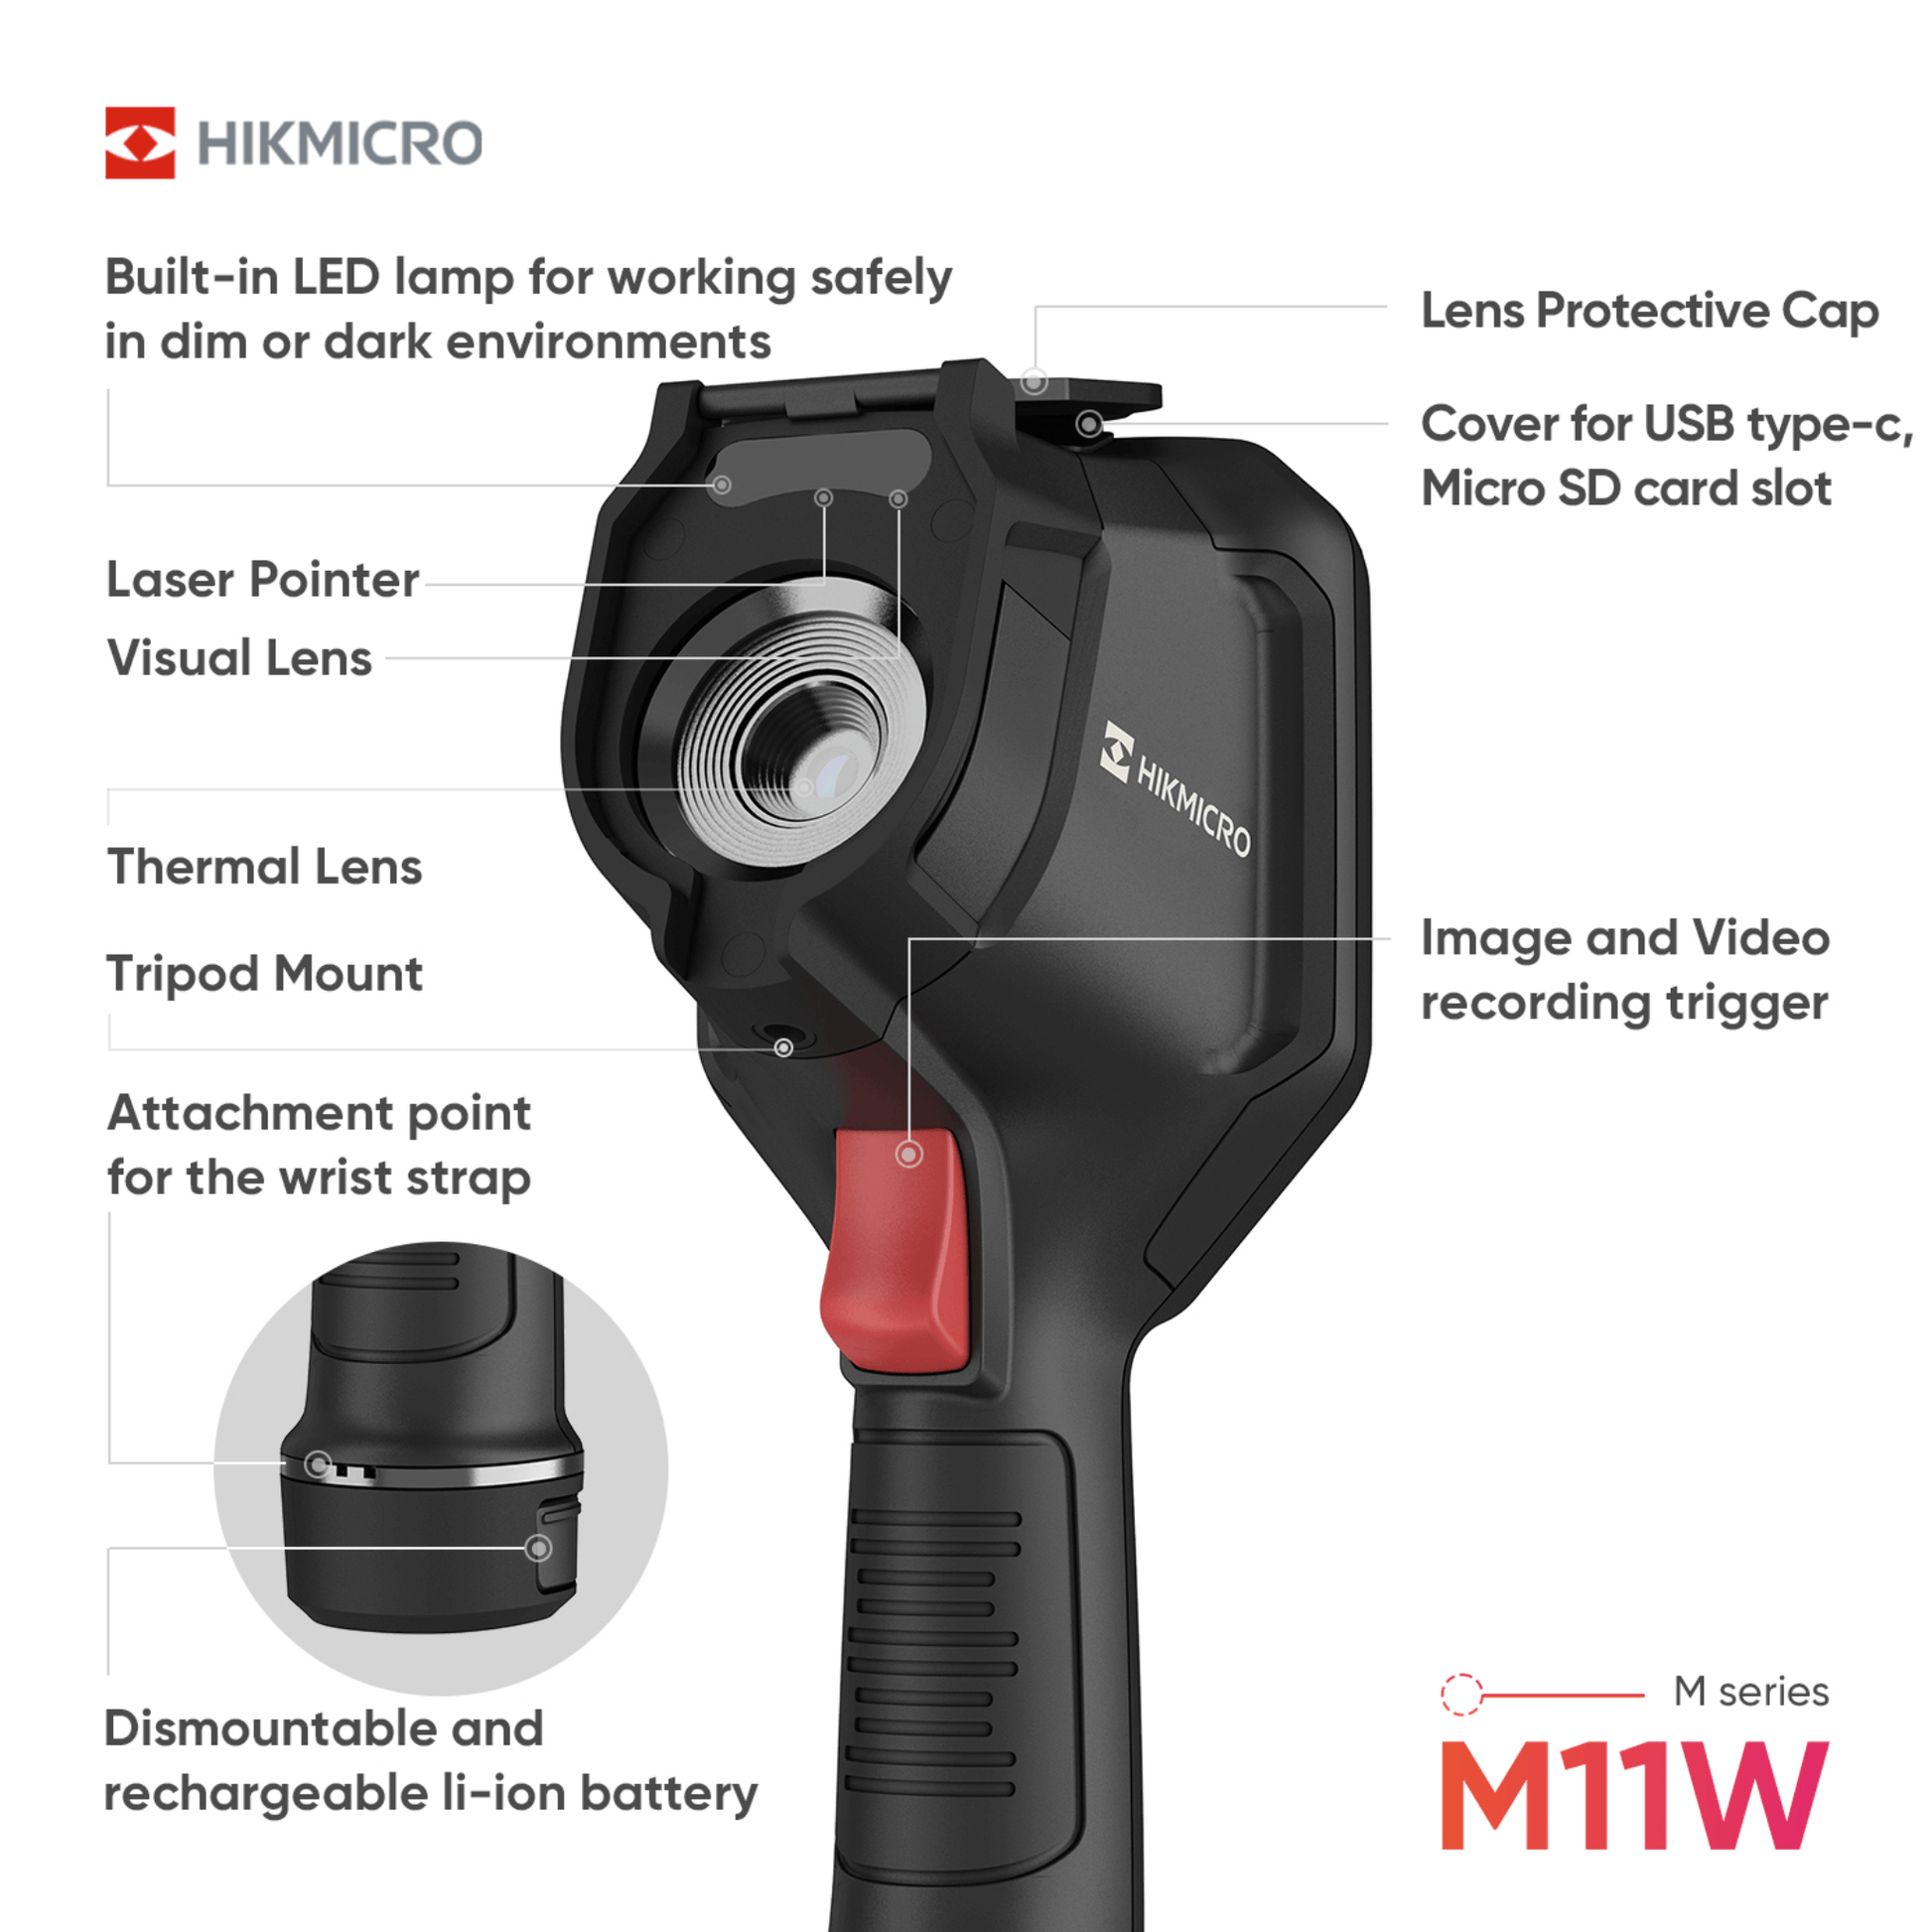 HikMicro M11W Handheld Thermography Camera physical features 2